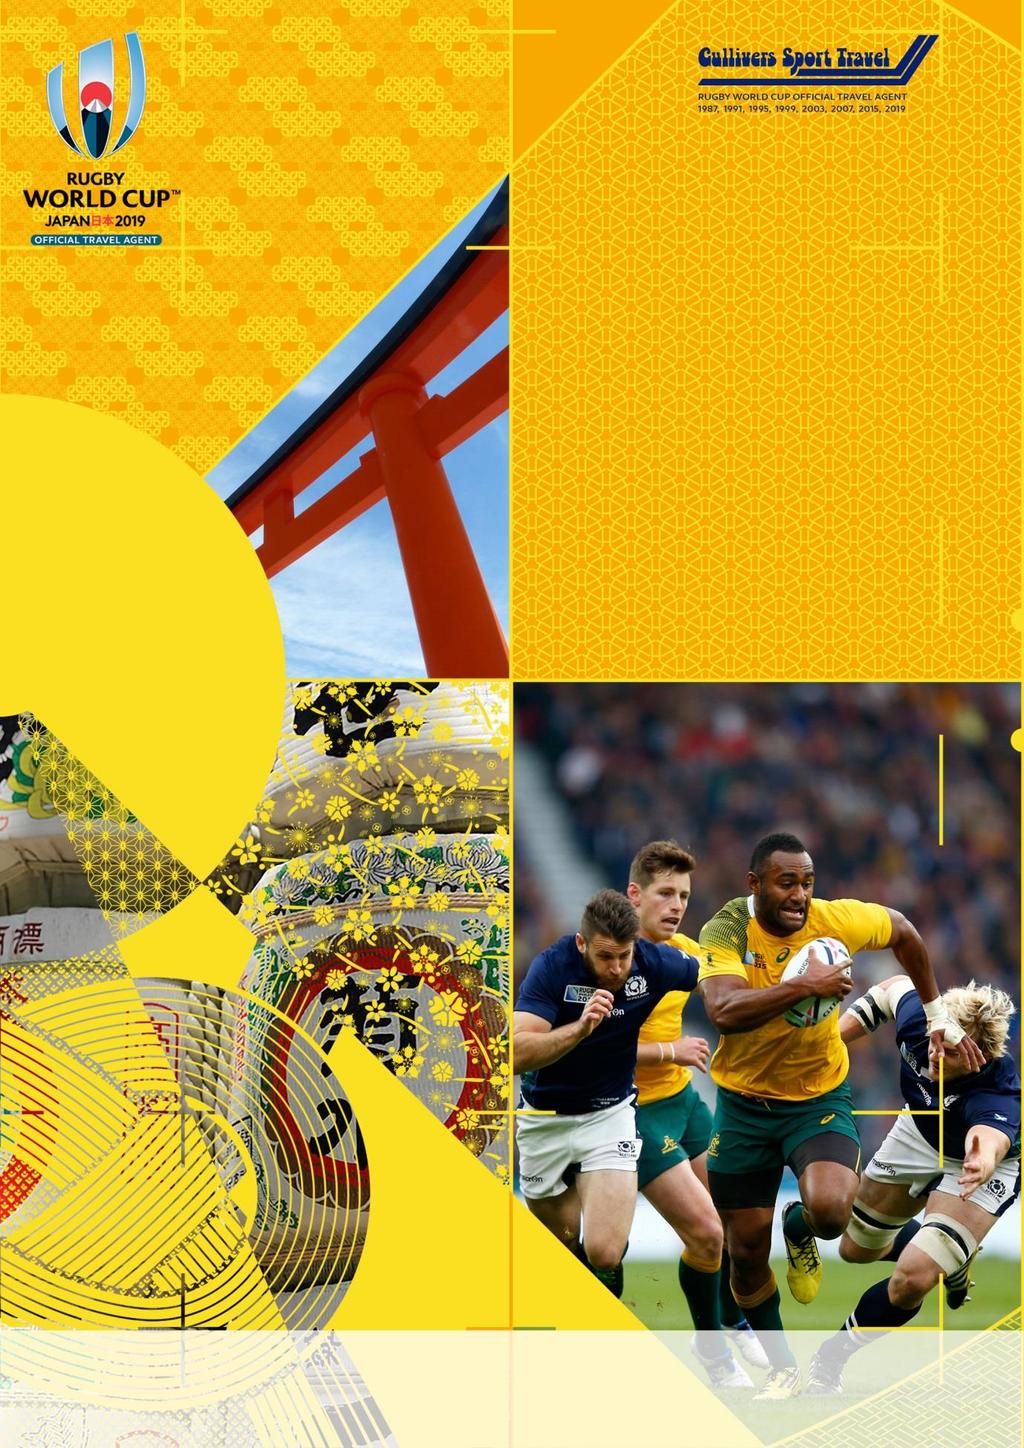 RUGBY WORLD CUP 2019 TOUR 6C ESCORTED BY PHIL WAUGH 24 OCT 4 NOV FEATURED MATCHES Semi-final 1 International Stadium Yokohama Semi-final 2 International Stadium Yokohama Final International Stadium